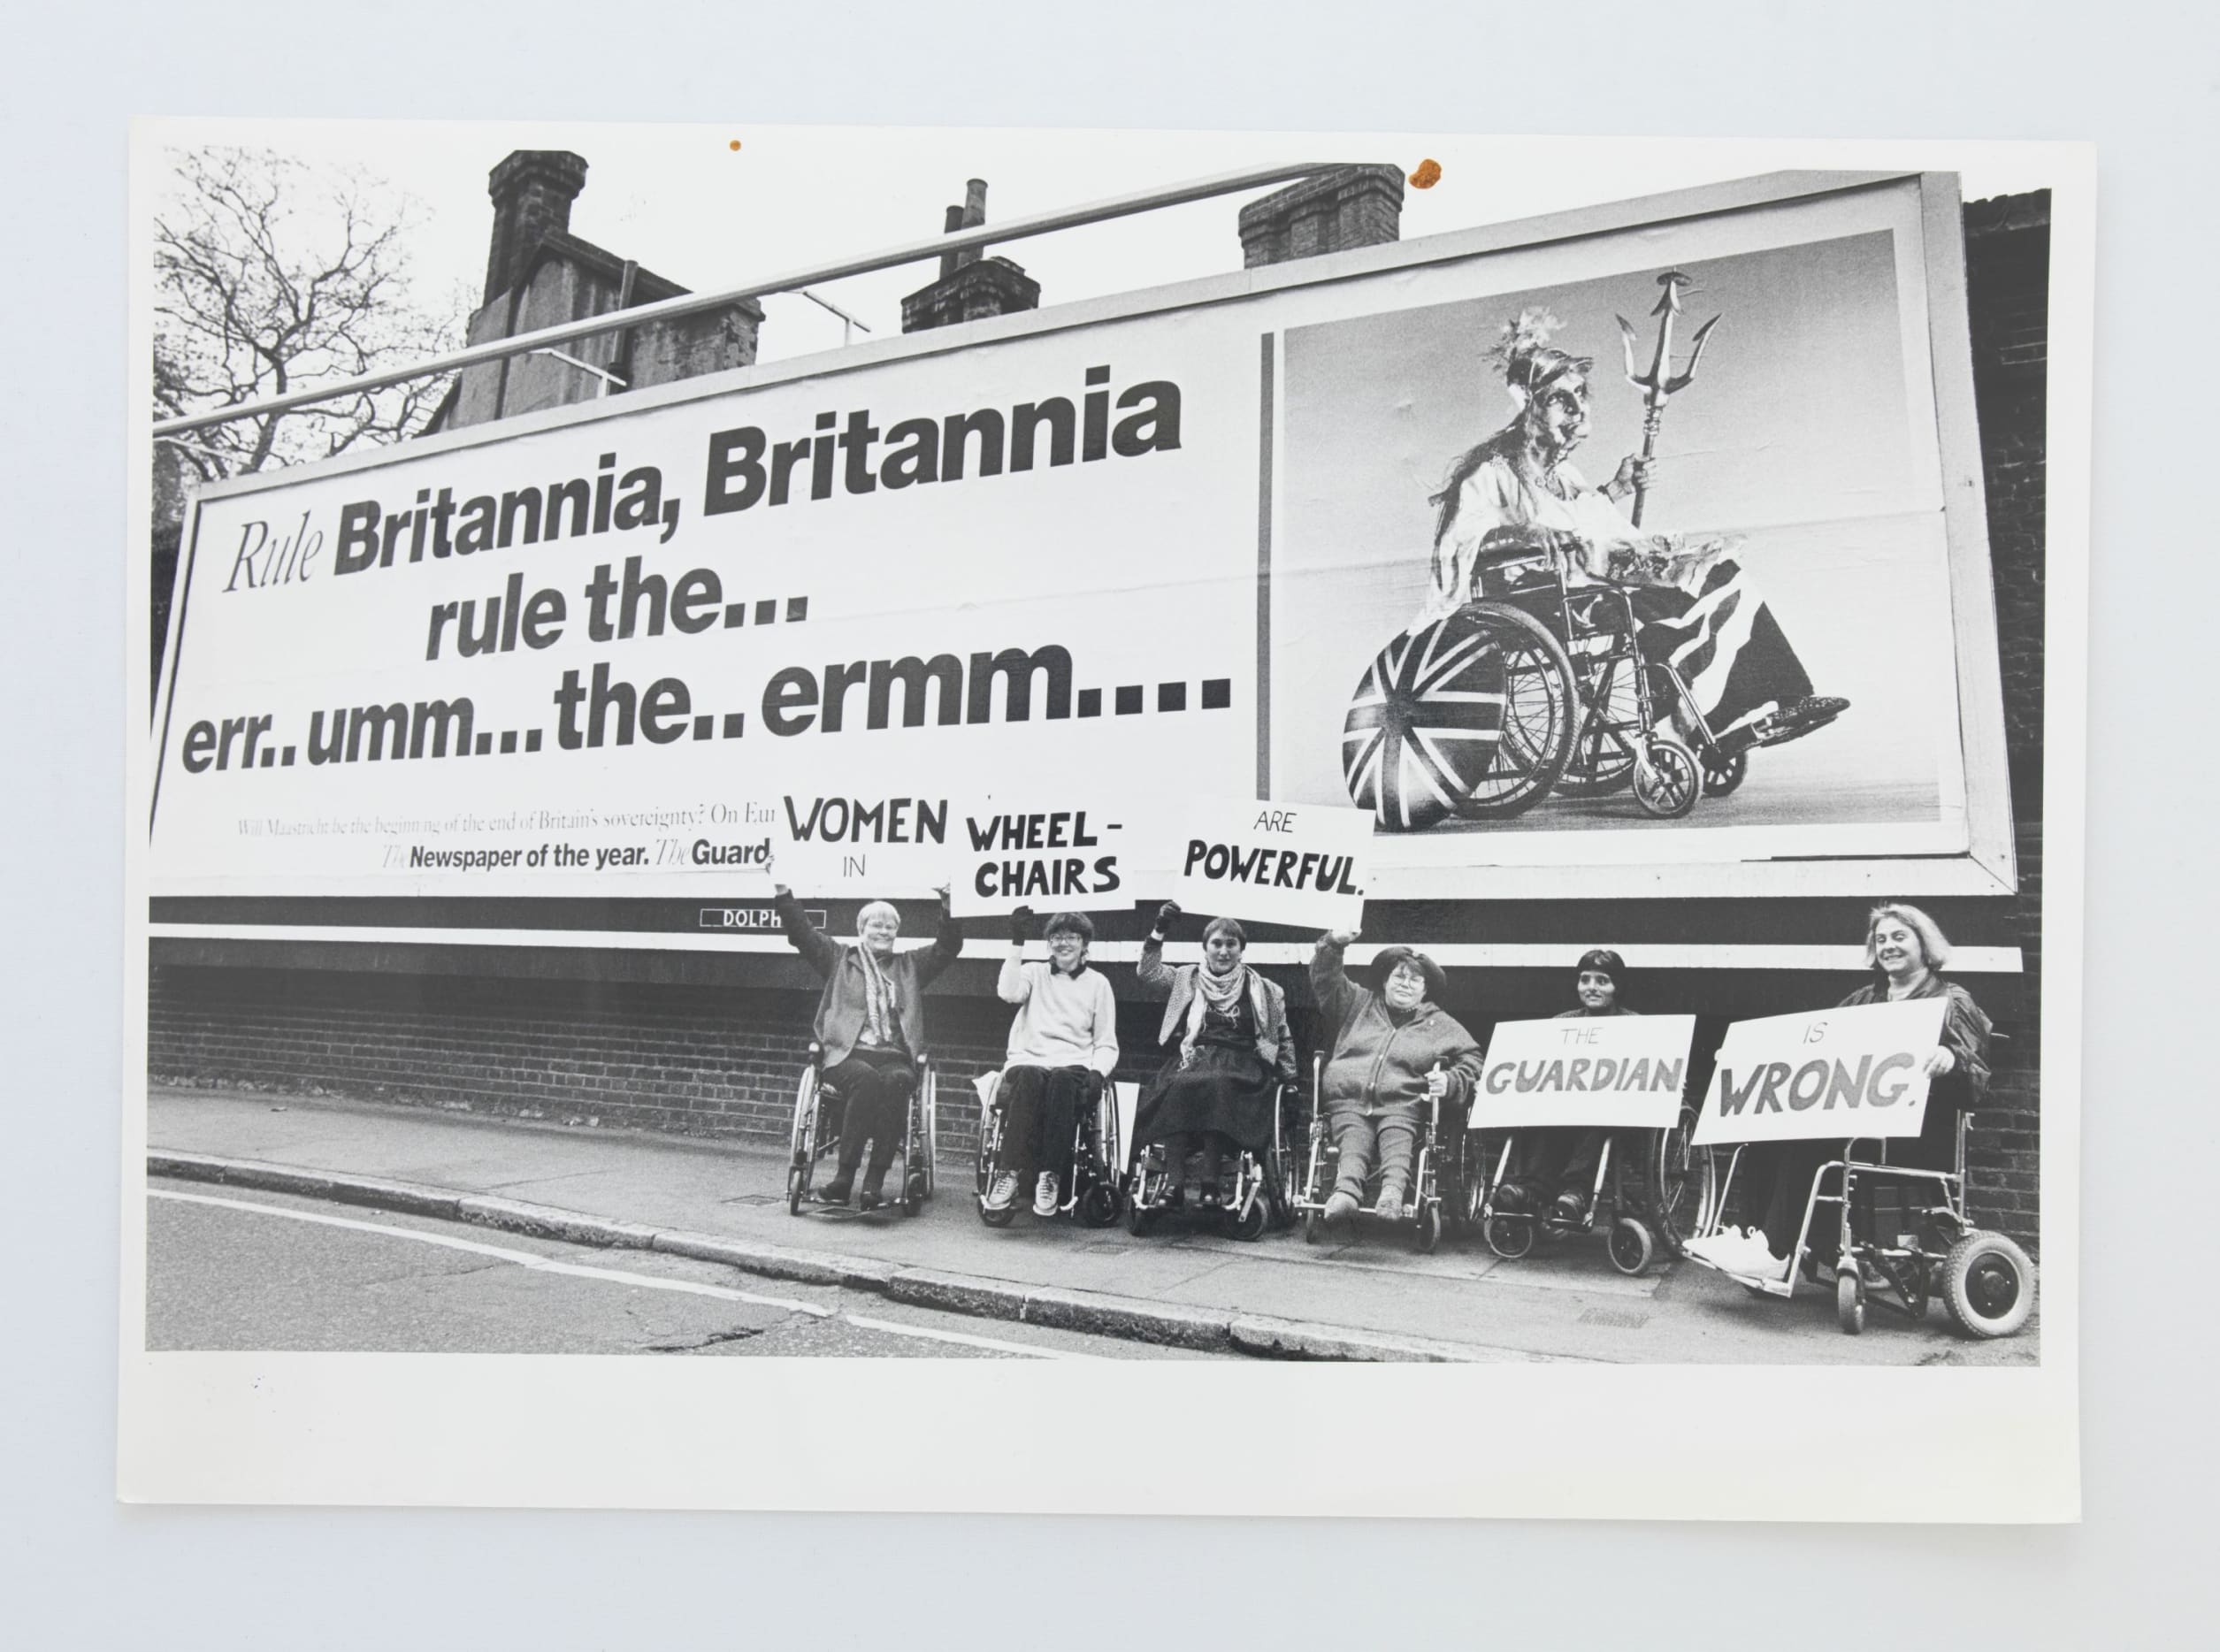 An old photograph of six female wheelchair users sitting underneath a billboard. The billboard is an advertisement for The Guardian newspaper when it won 